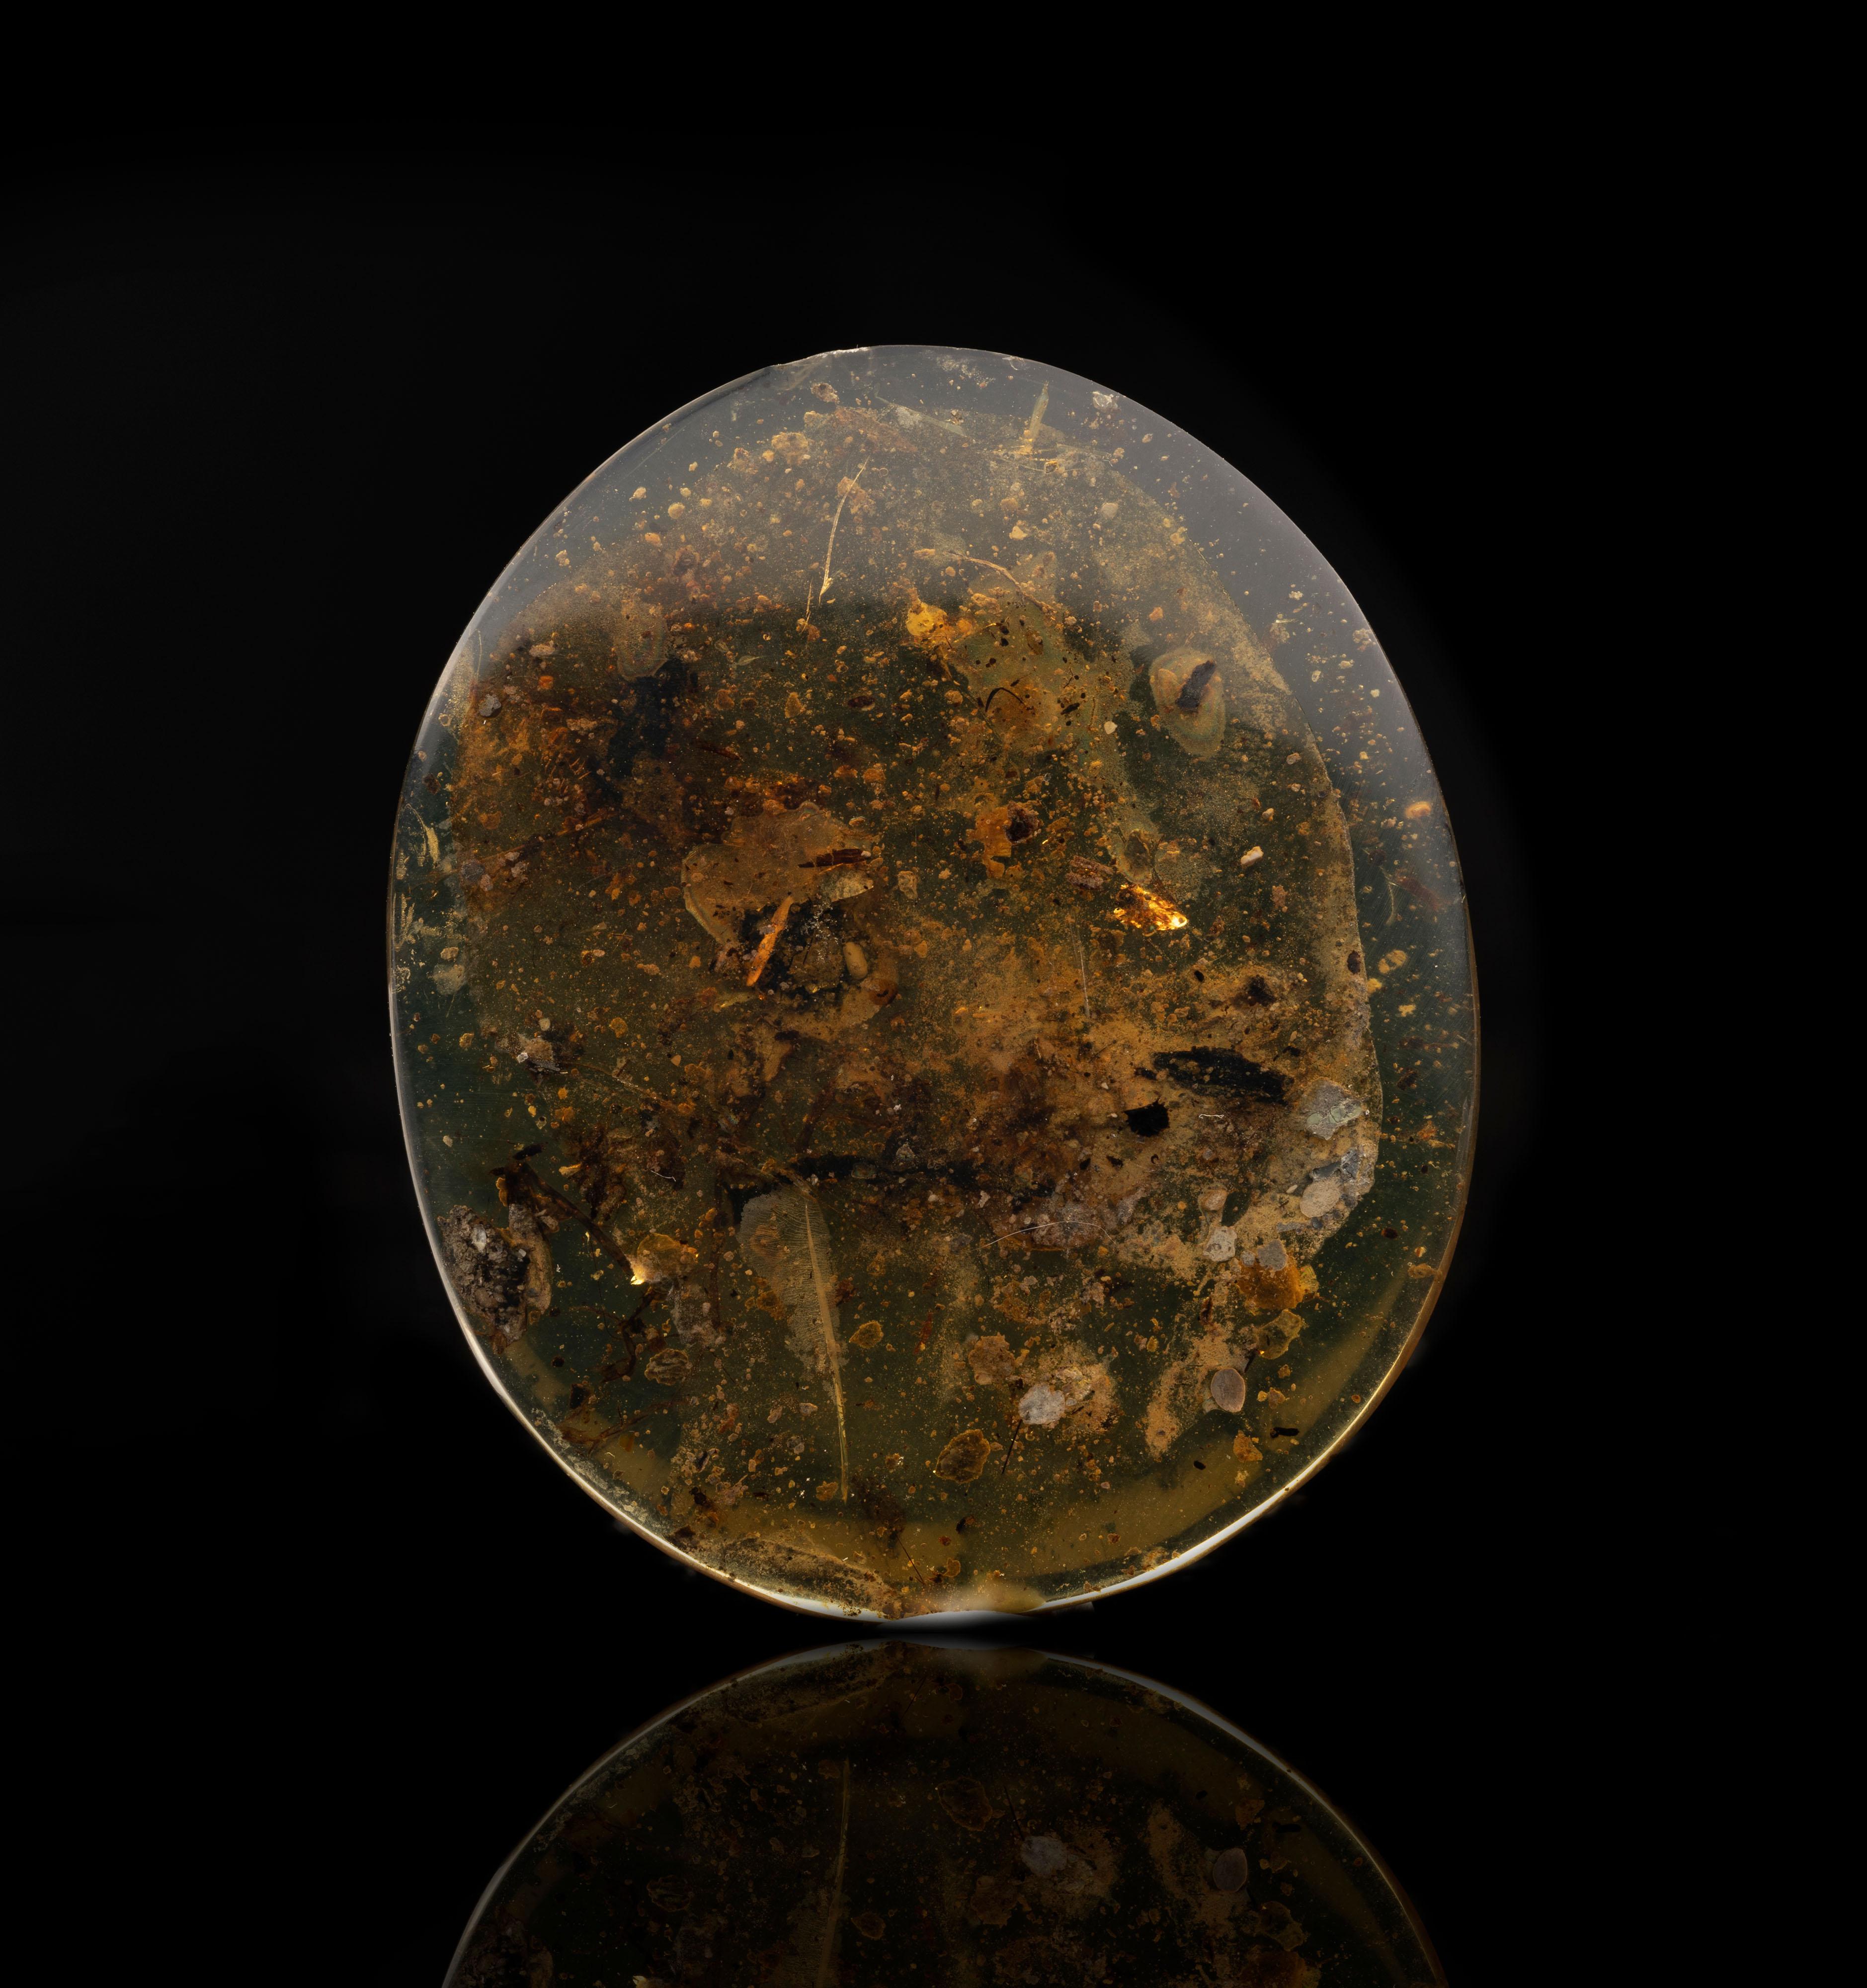 This genuine Burmese amber specimen dates back approximately 99 million years and contains a fully preserved snail shell with associated debris. It formed during the Late Cretaceous period, so long ago that dinosaurs had yet to go extinct. Burmese